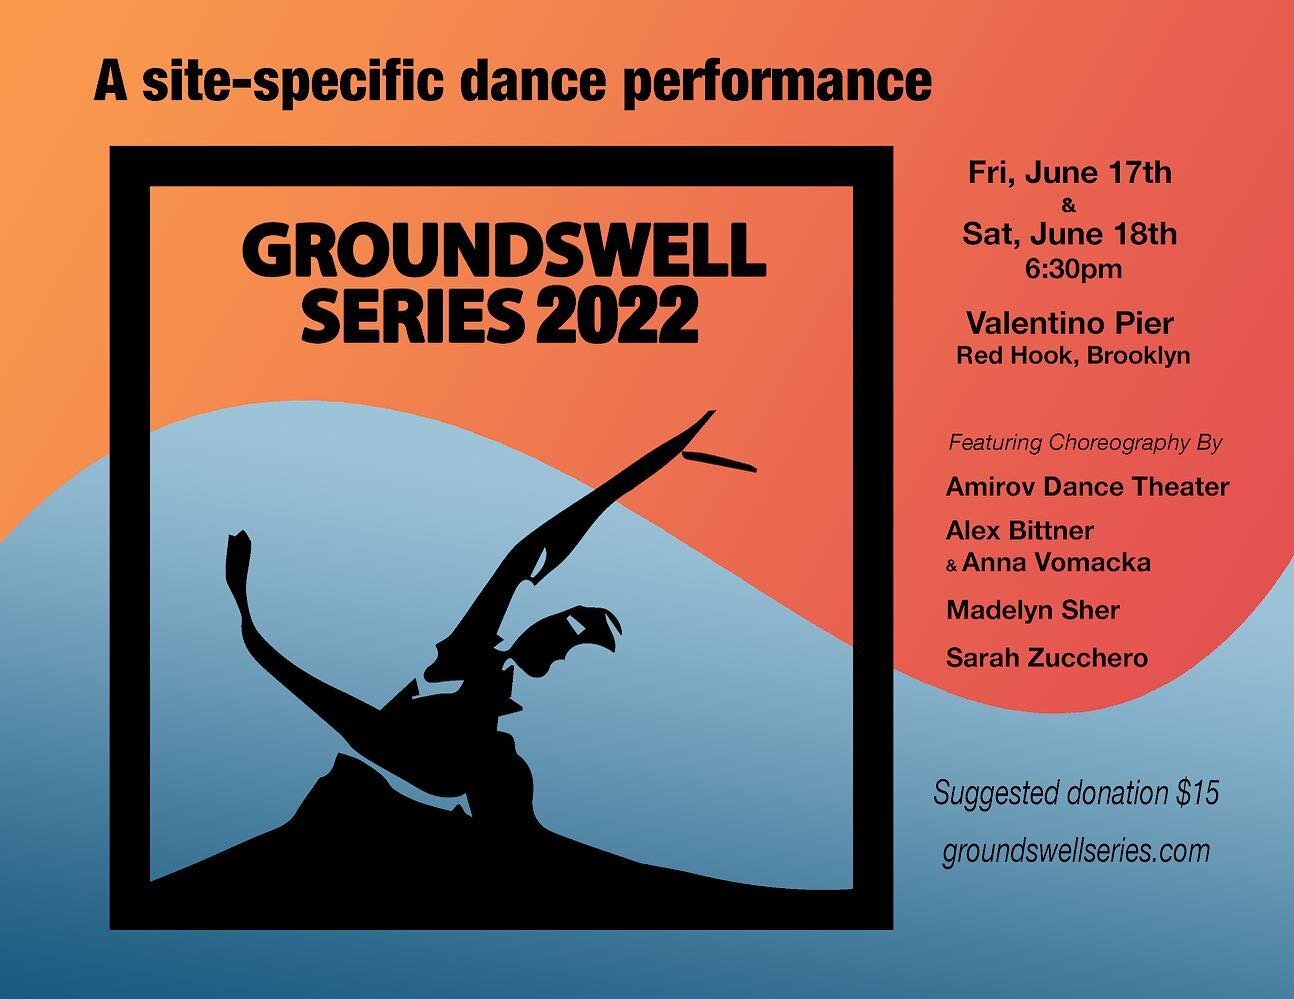 📣 GROUNDSWELL SERIES 2022 IS HERE!!✨featuring choreography by Amirov Dance Theater @amirovdancetheater , Alex Bittner @lilbittybittner + Anna Vomacka @anickaaagaiaaa , Madelyn Sher @madzds25 , and Sarah Zucchero @mowglilolimo !! ✨You&rsquo;ll have 2